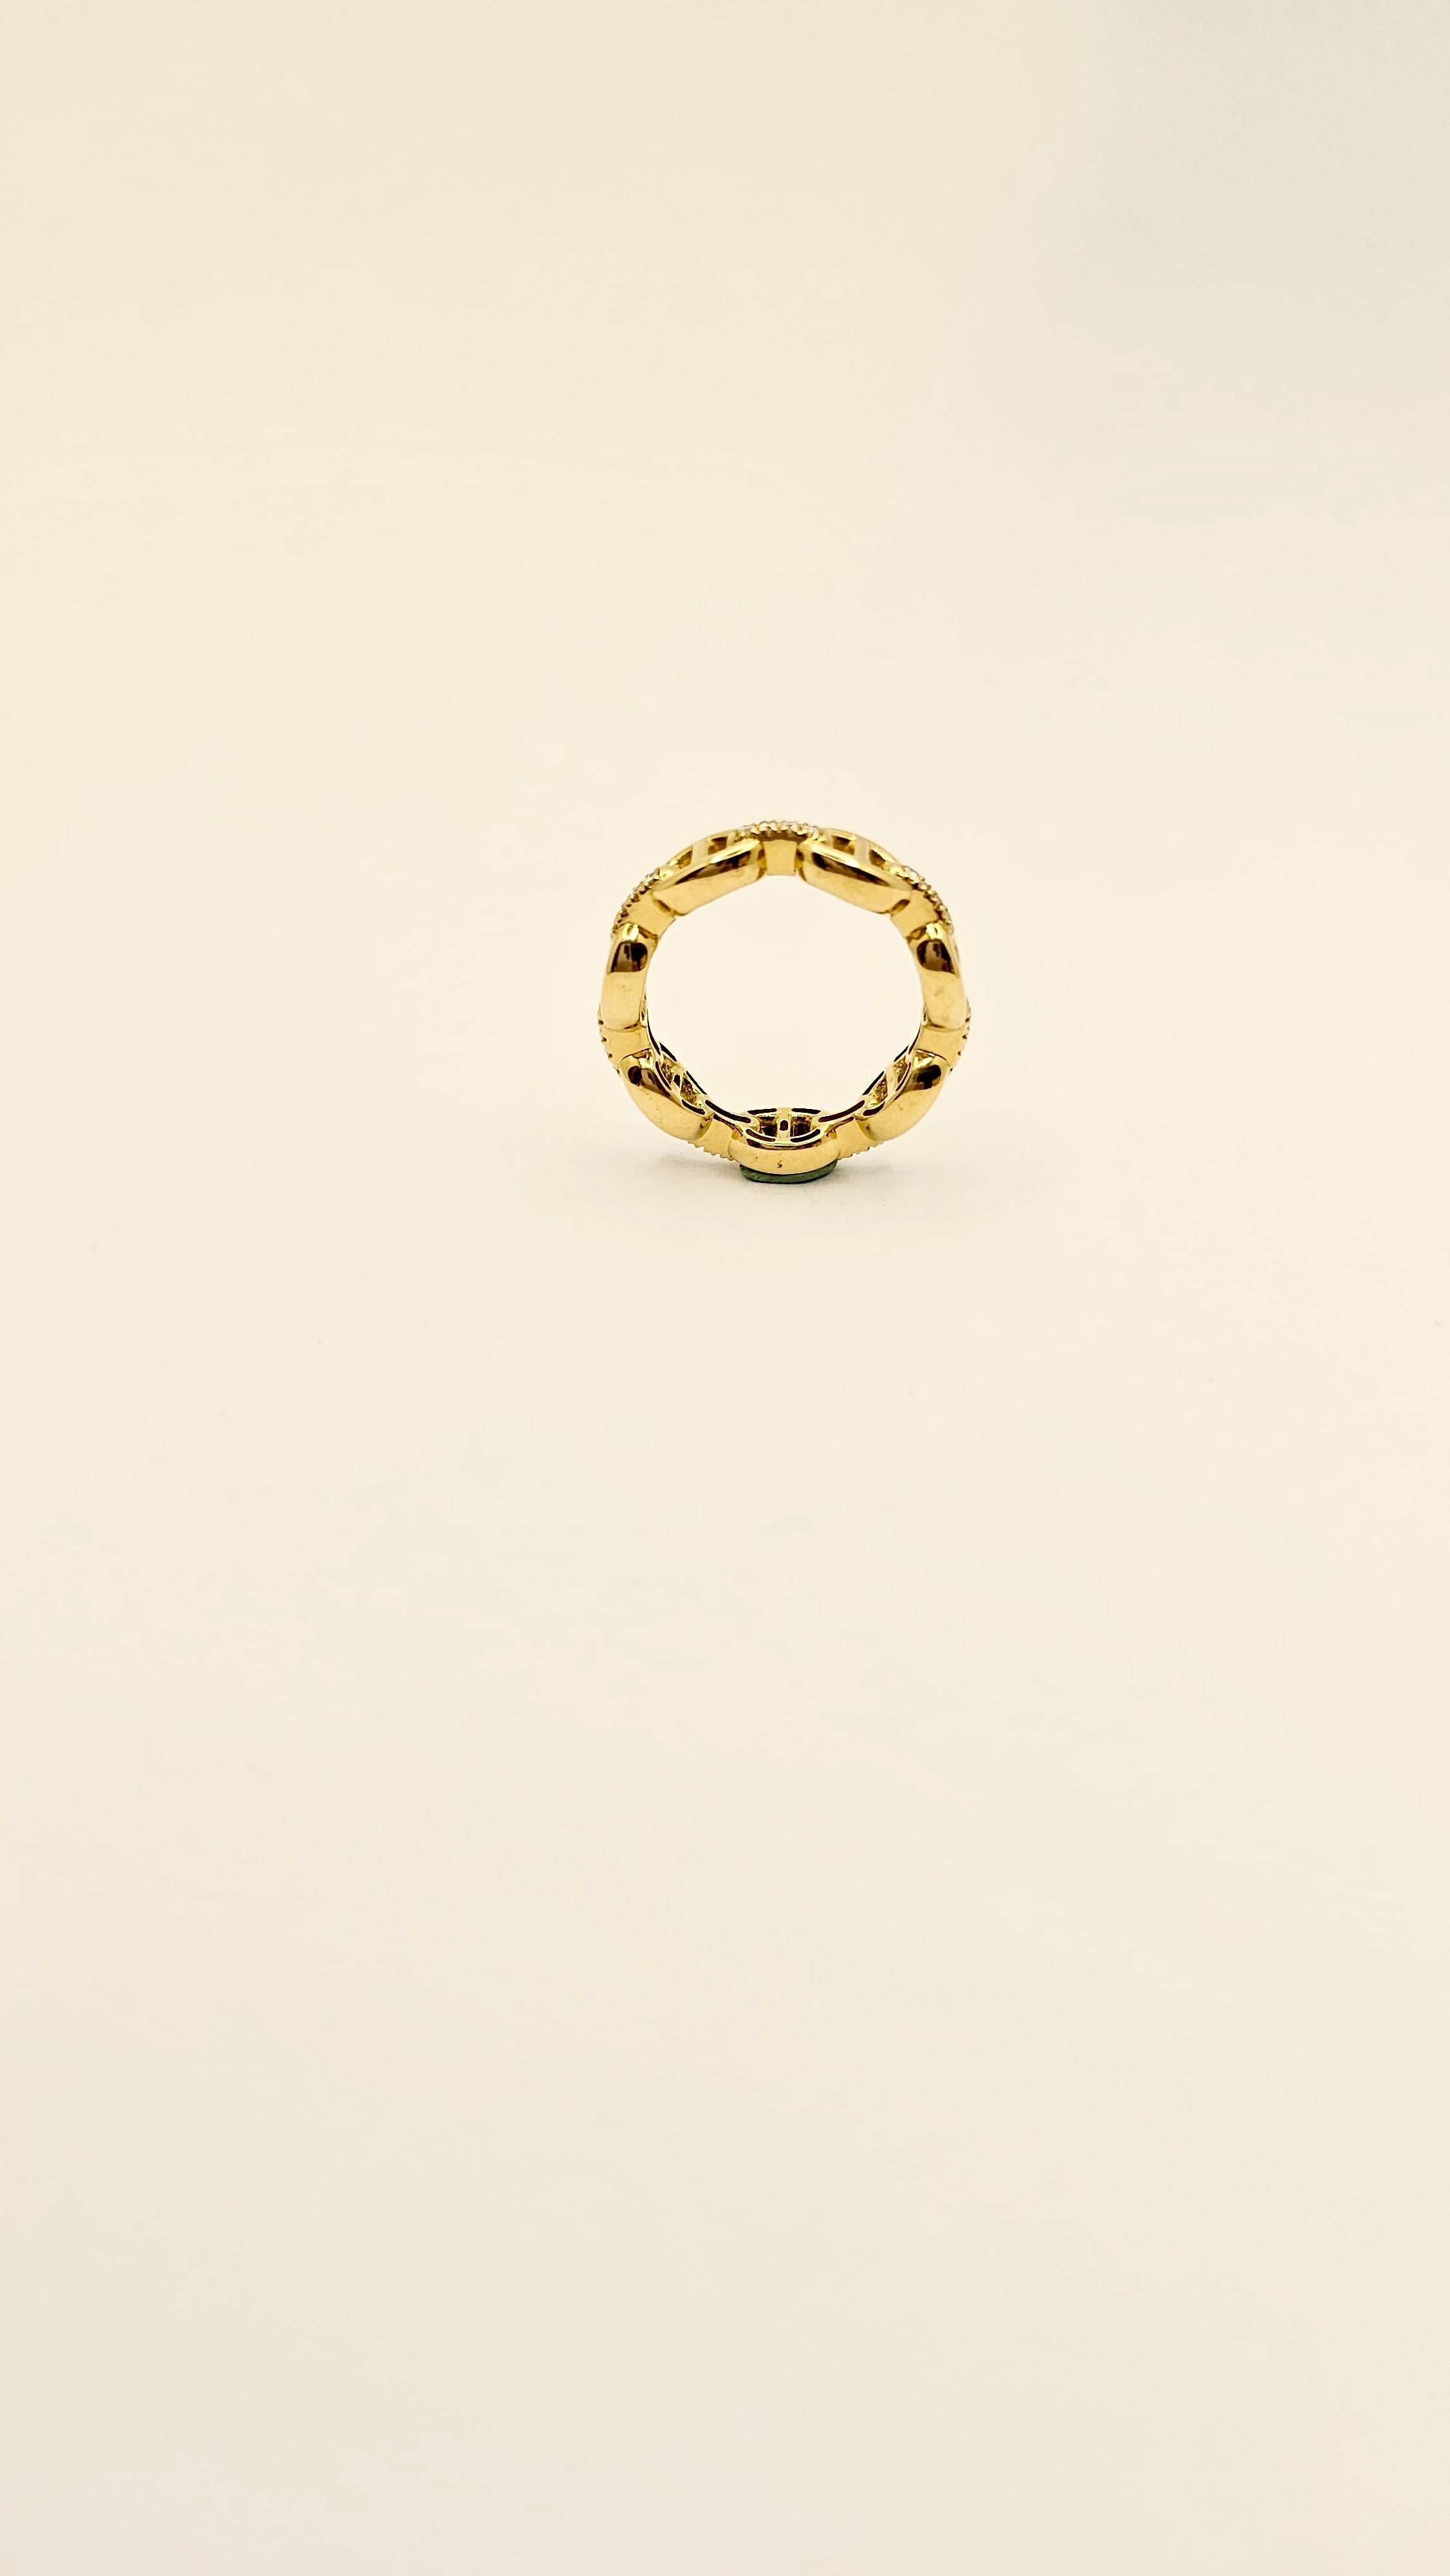 A solid 18kt yellow gold ring with a 1960s design.
This ring is made from a rigid navy mesh, also called anchor mesh.
Each link is interspersed with a bracket of brilliant-cut Diamonds for a carat of 0.20.
The weight of this ring is 6.80 g.
Its